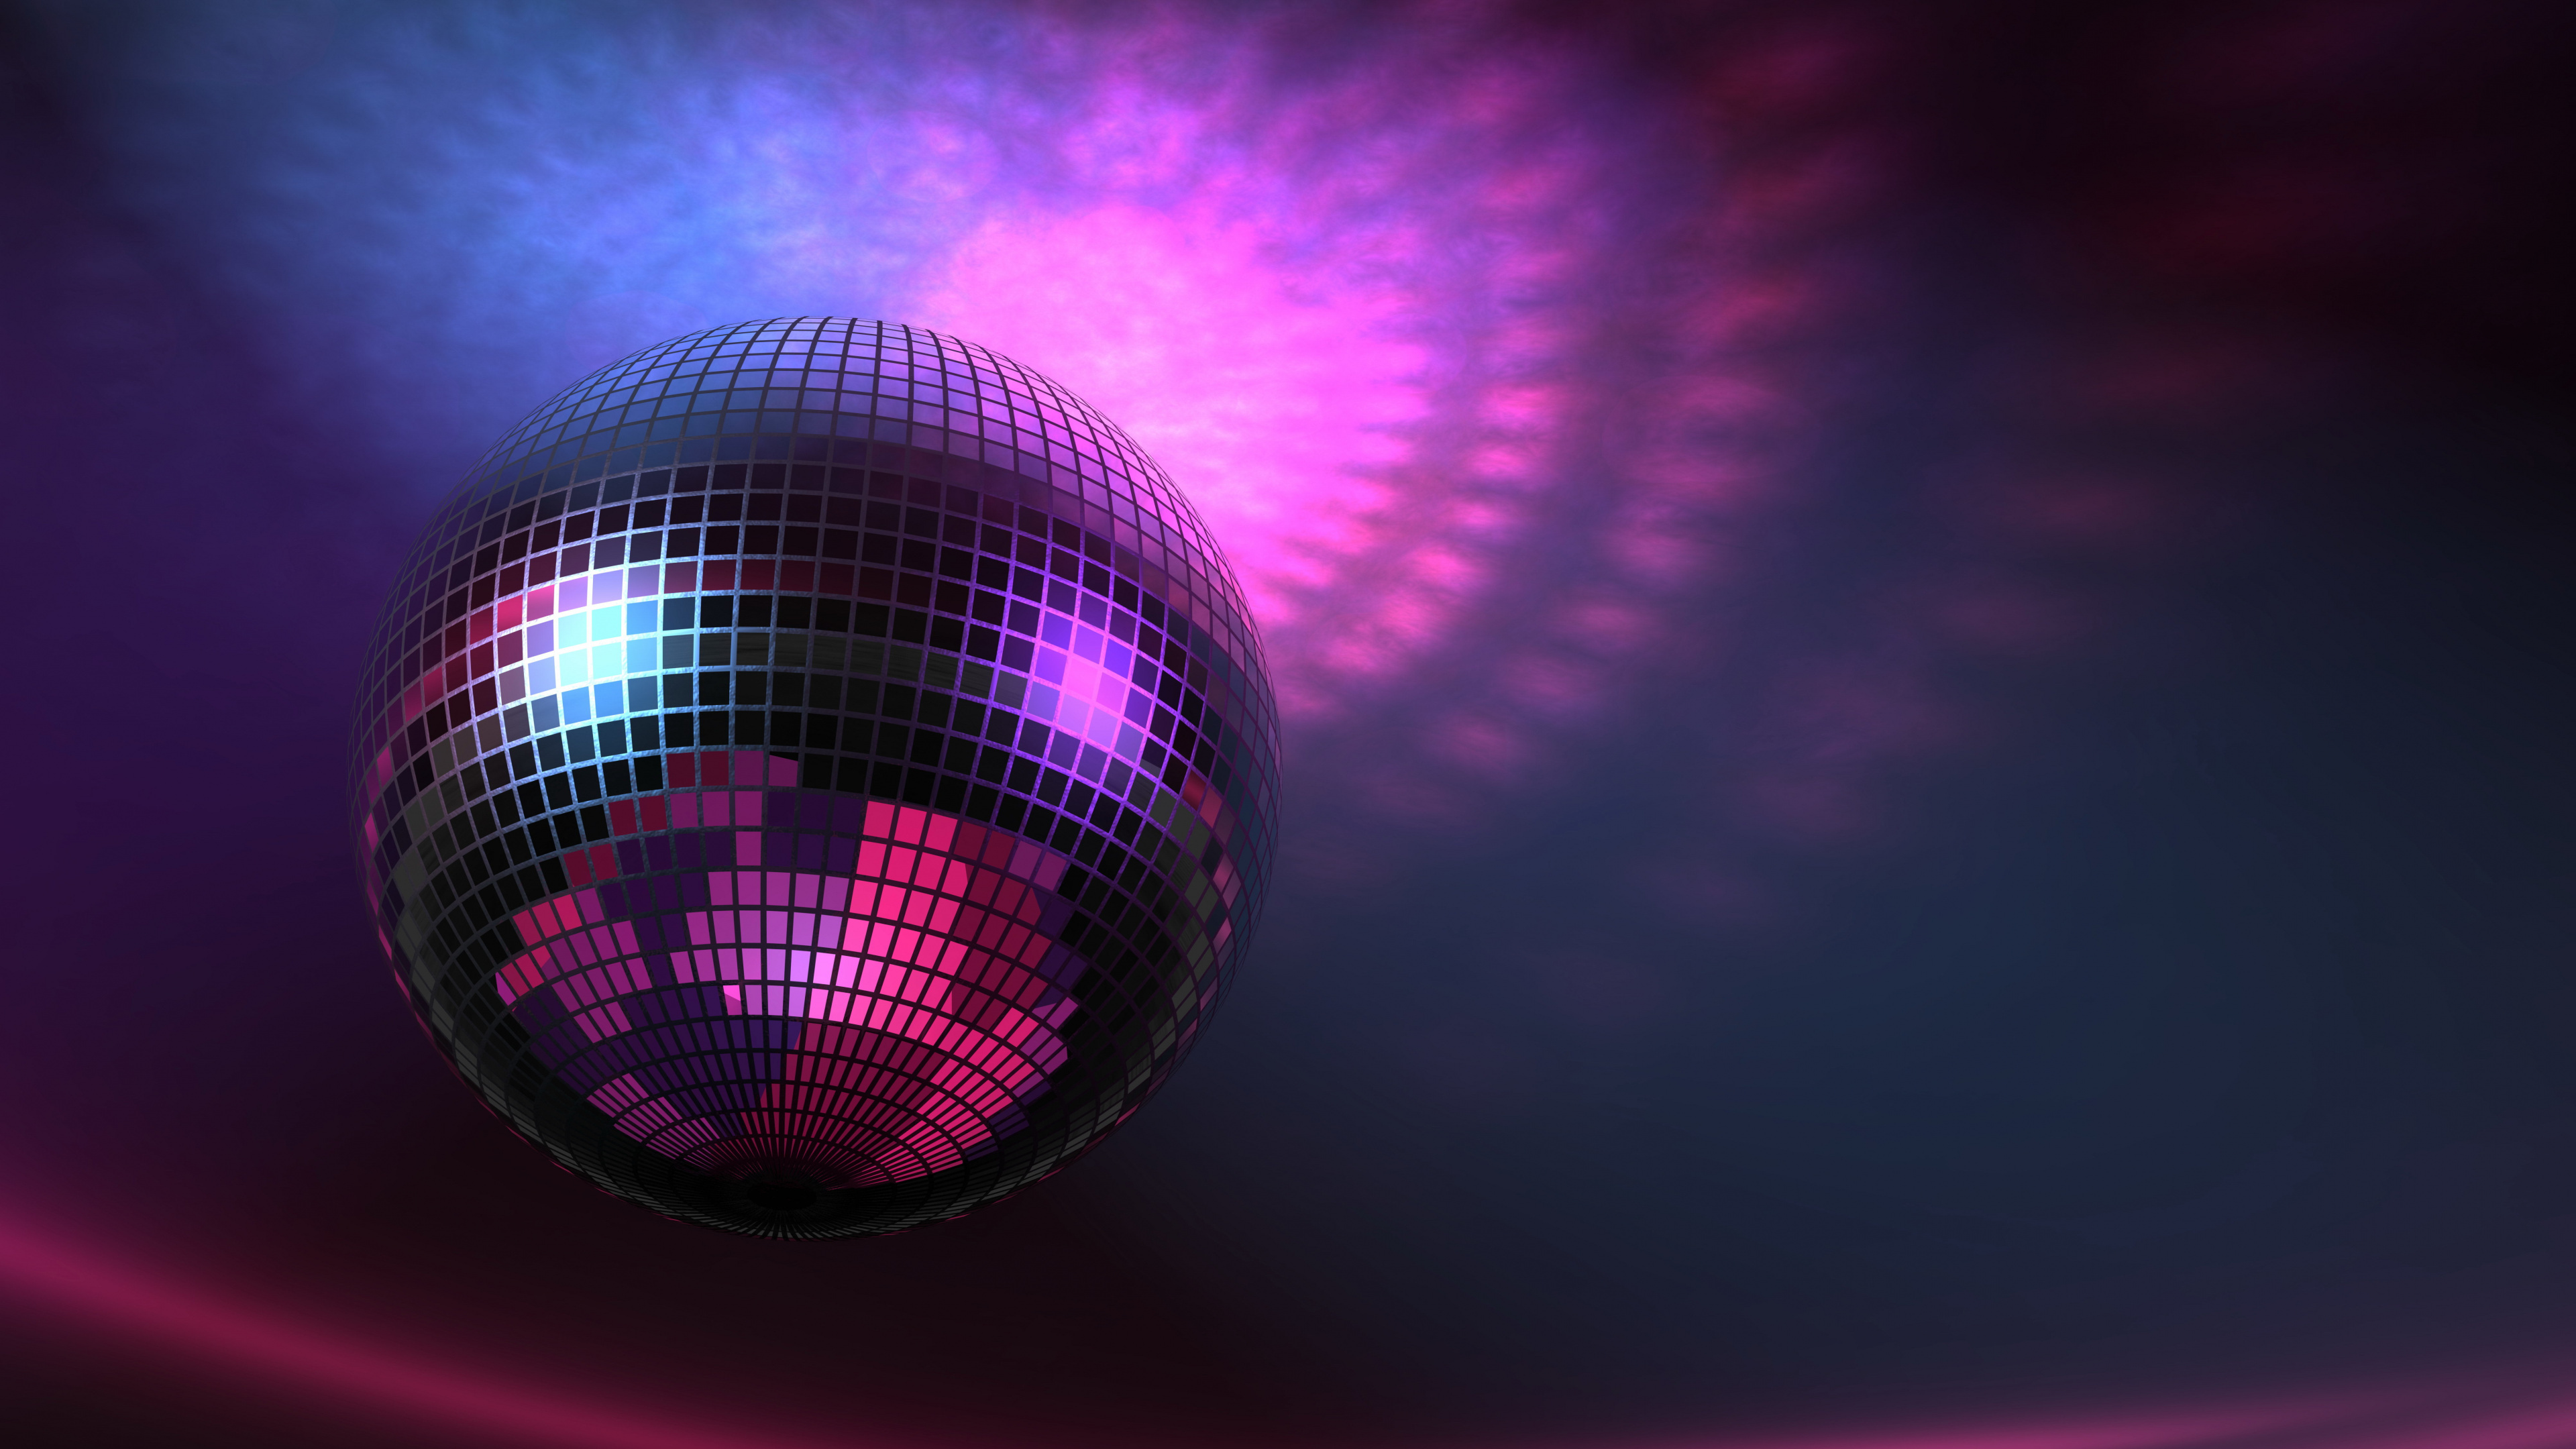 Disco: A mirror ball, A roughly spherical object reflecting light, Thousands of facets. 3840x2160 4K Background.